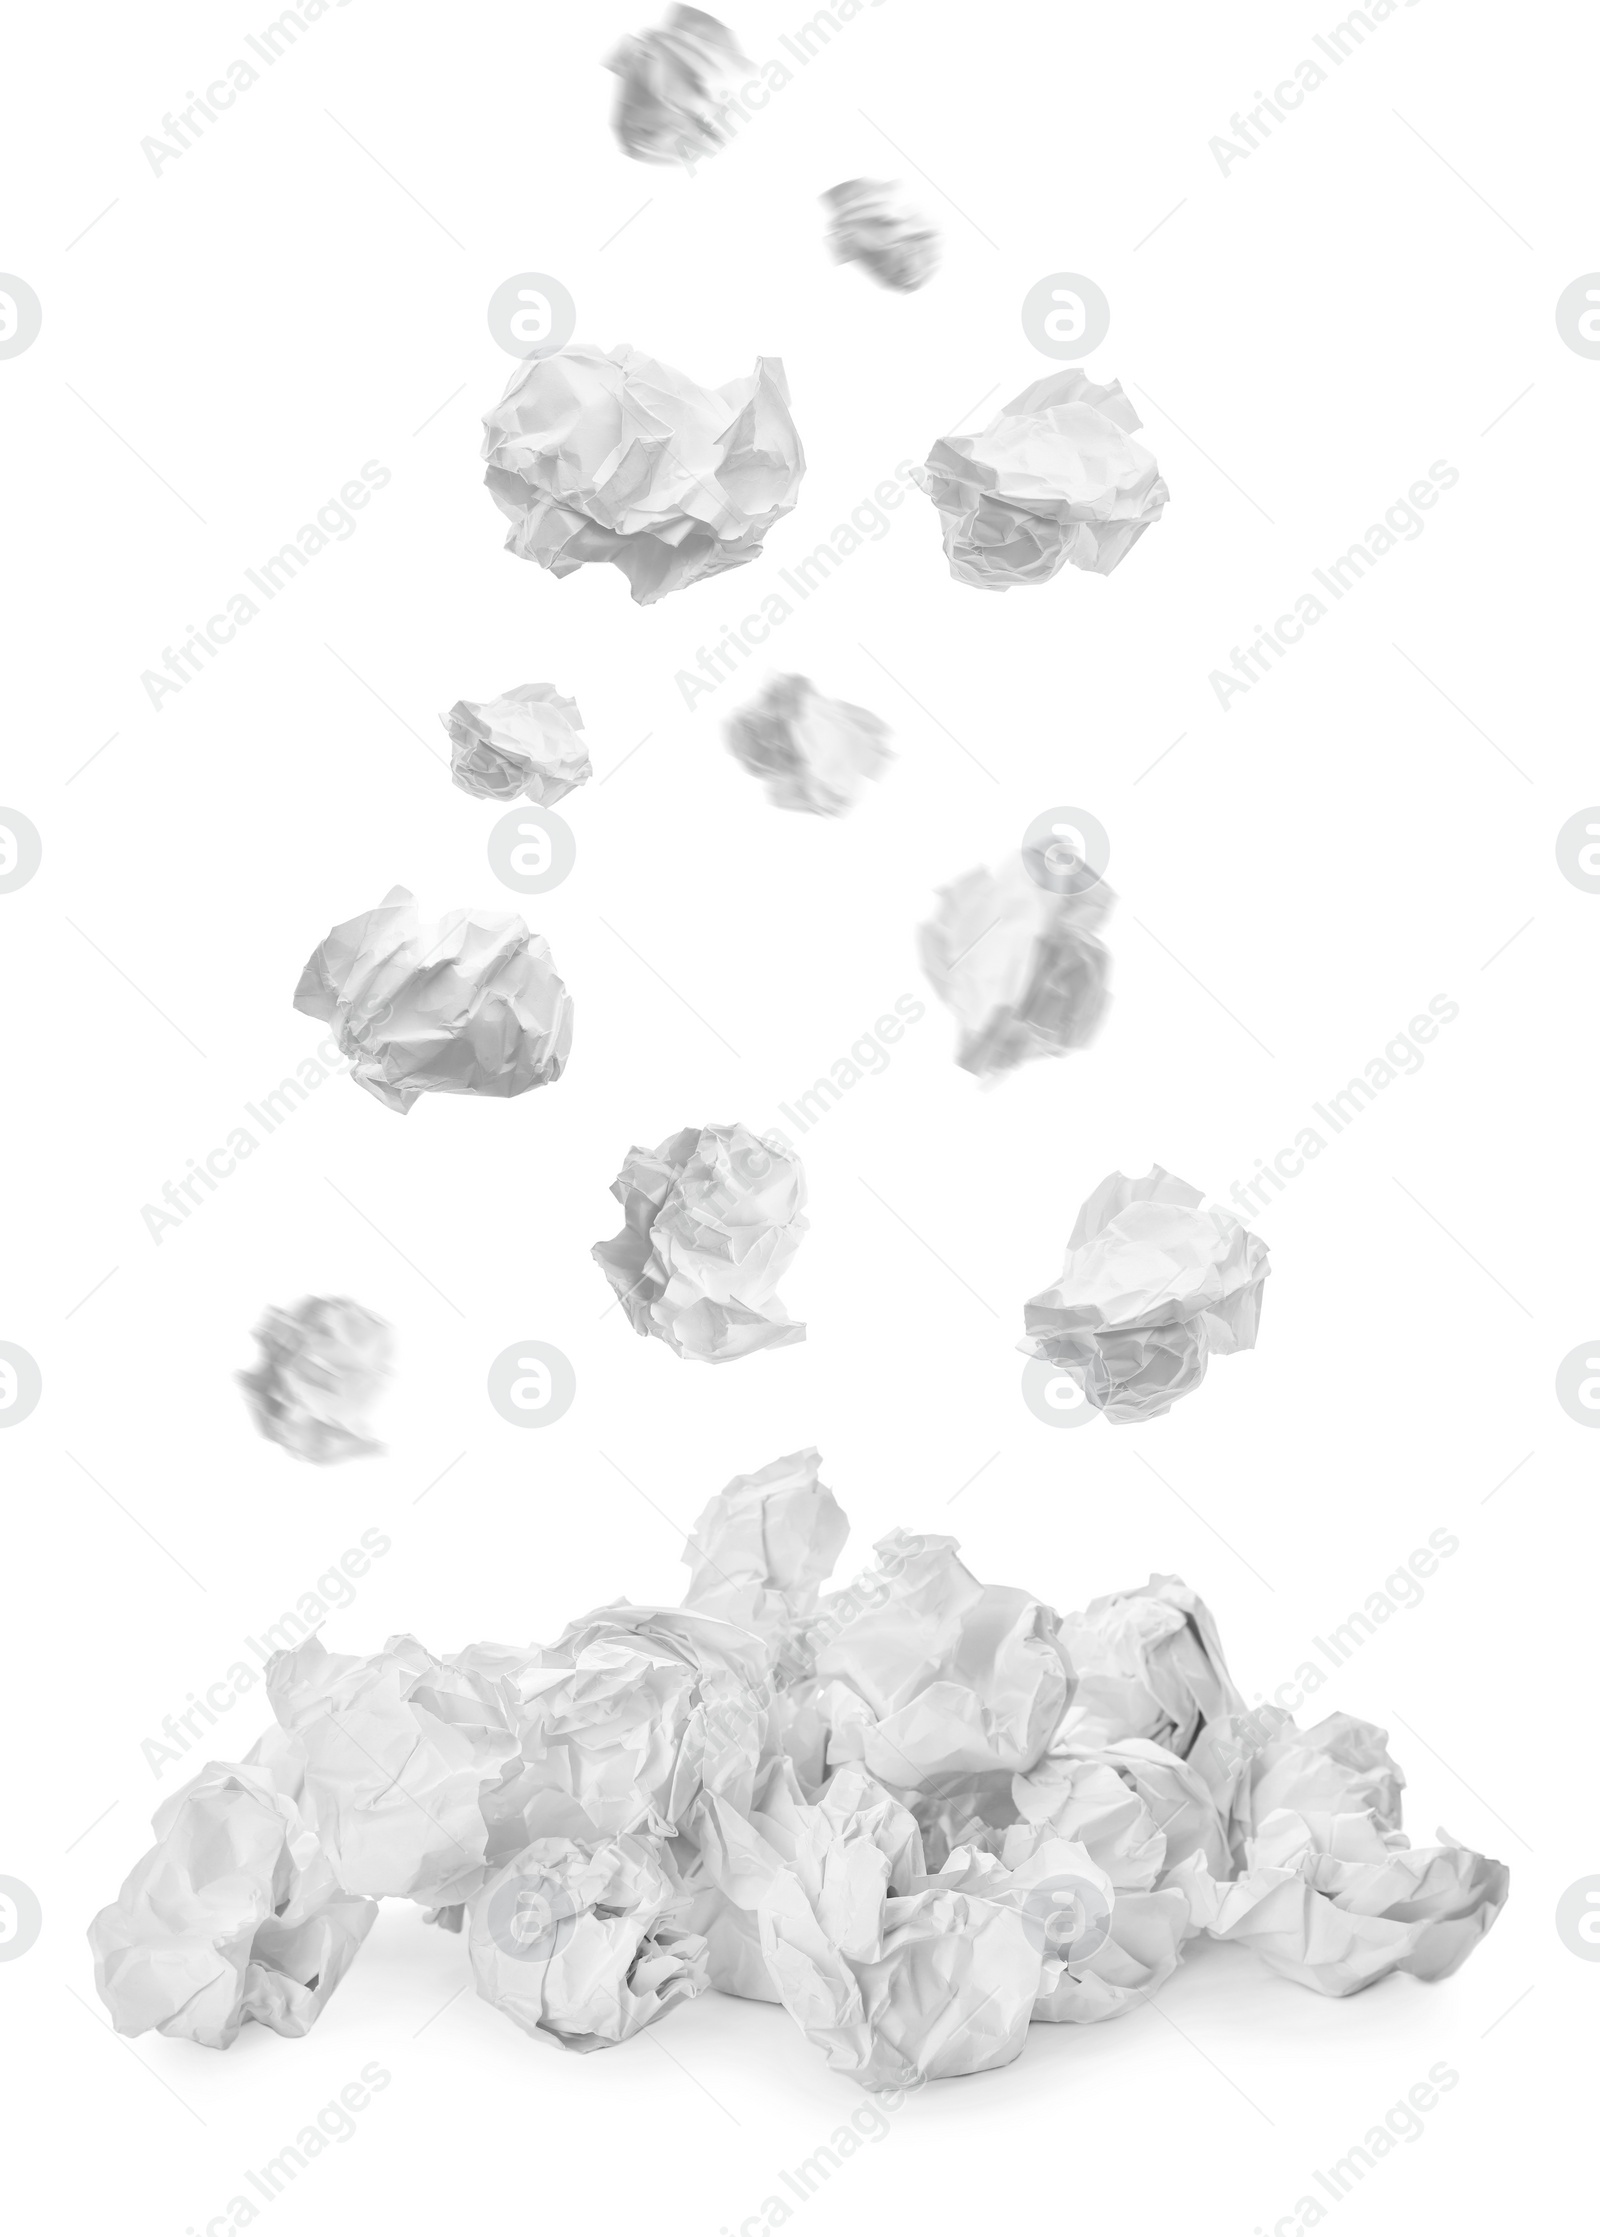 Image of Crumpled paper falling into pile on white background